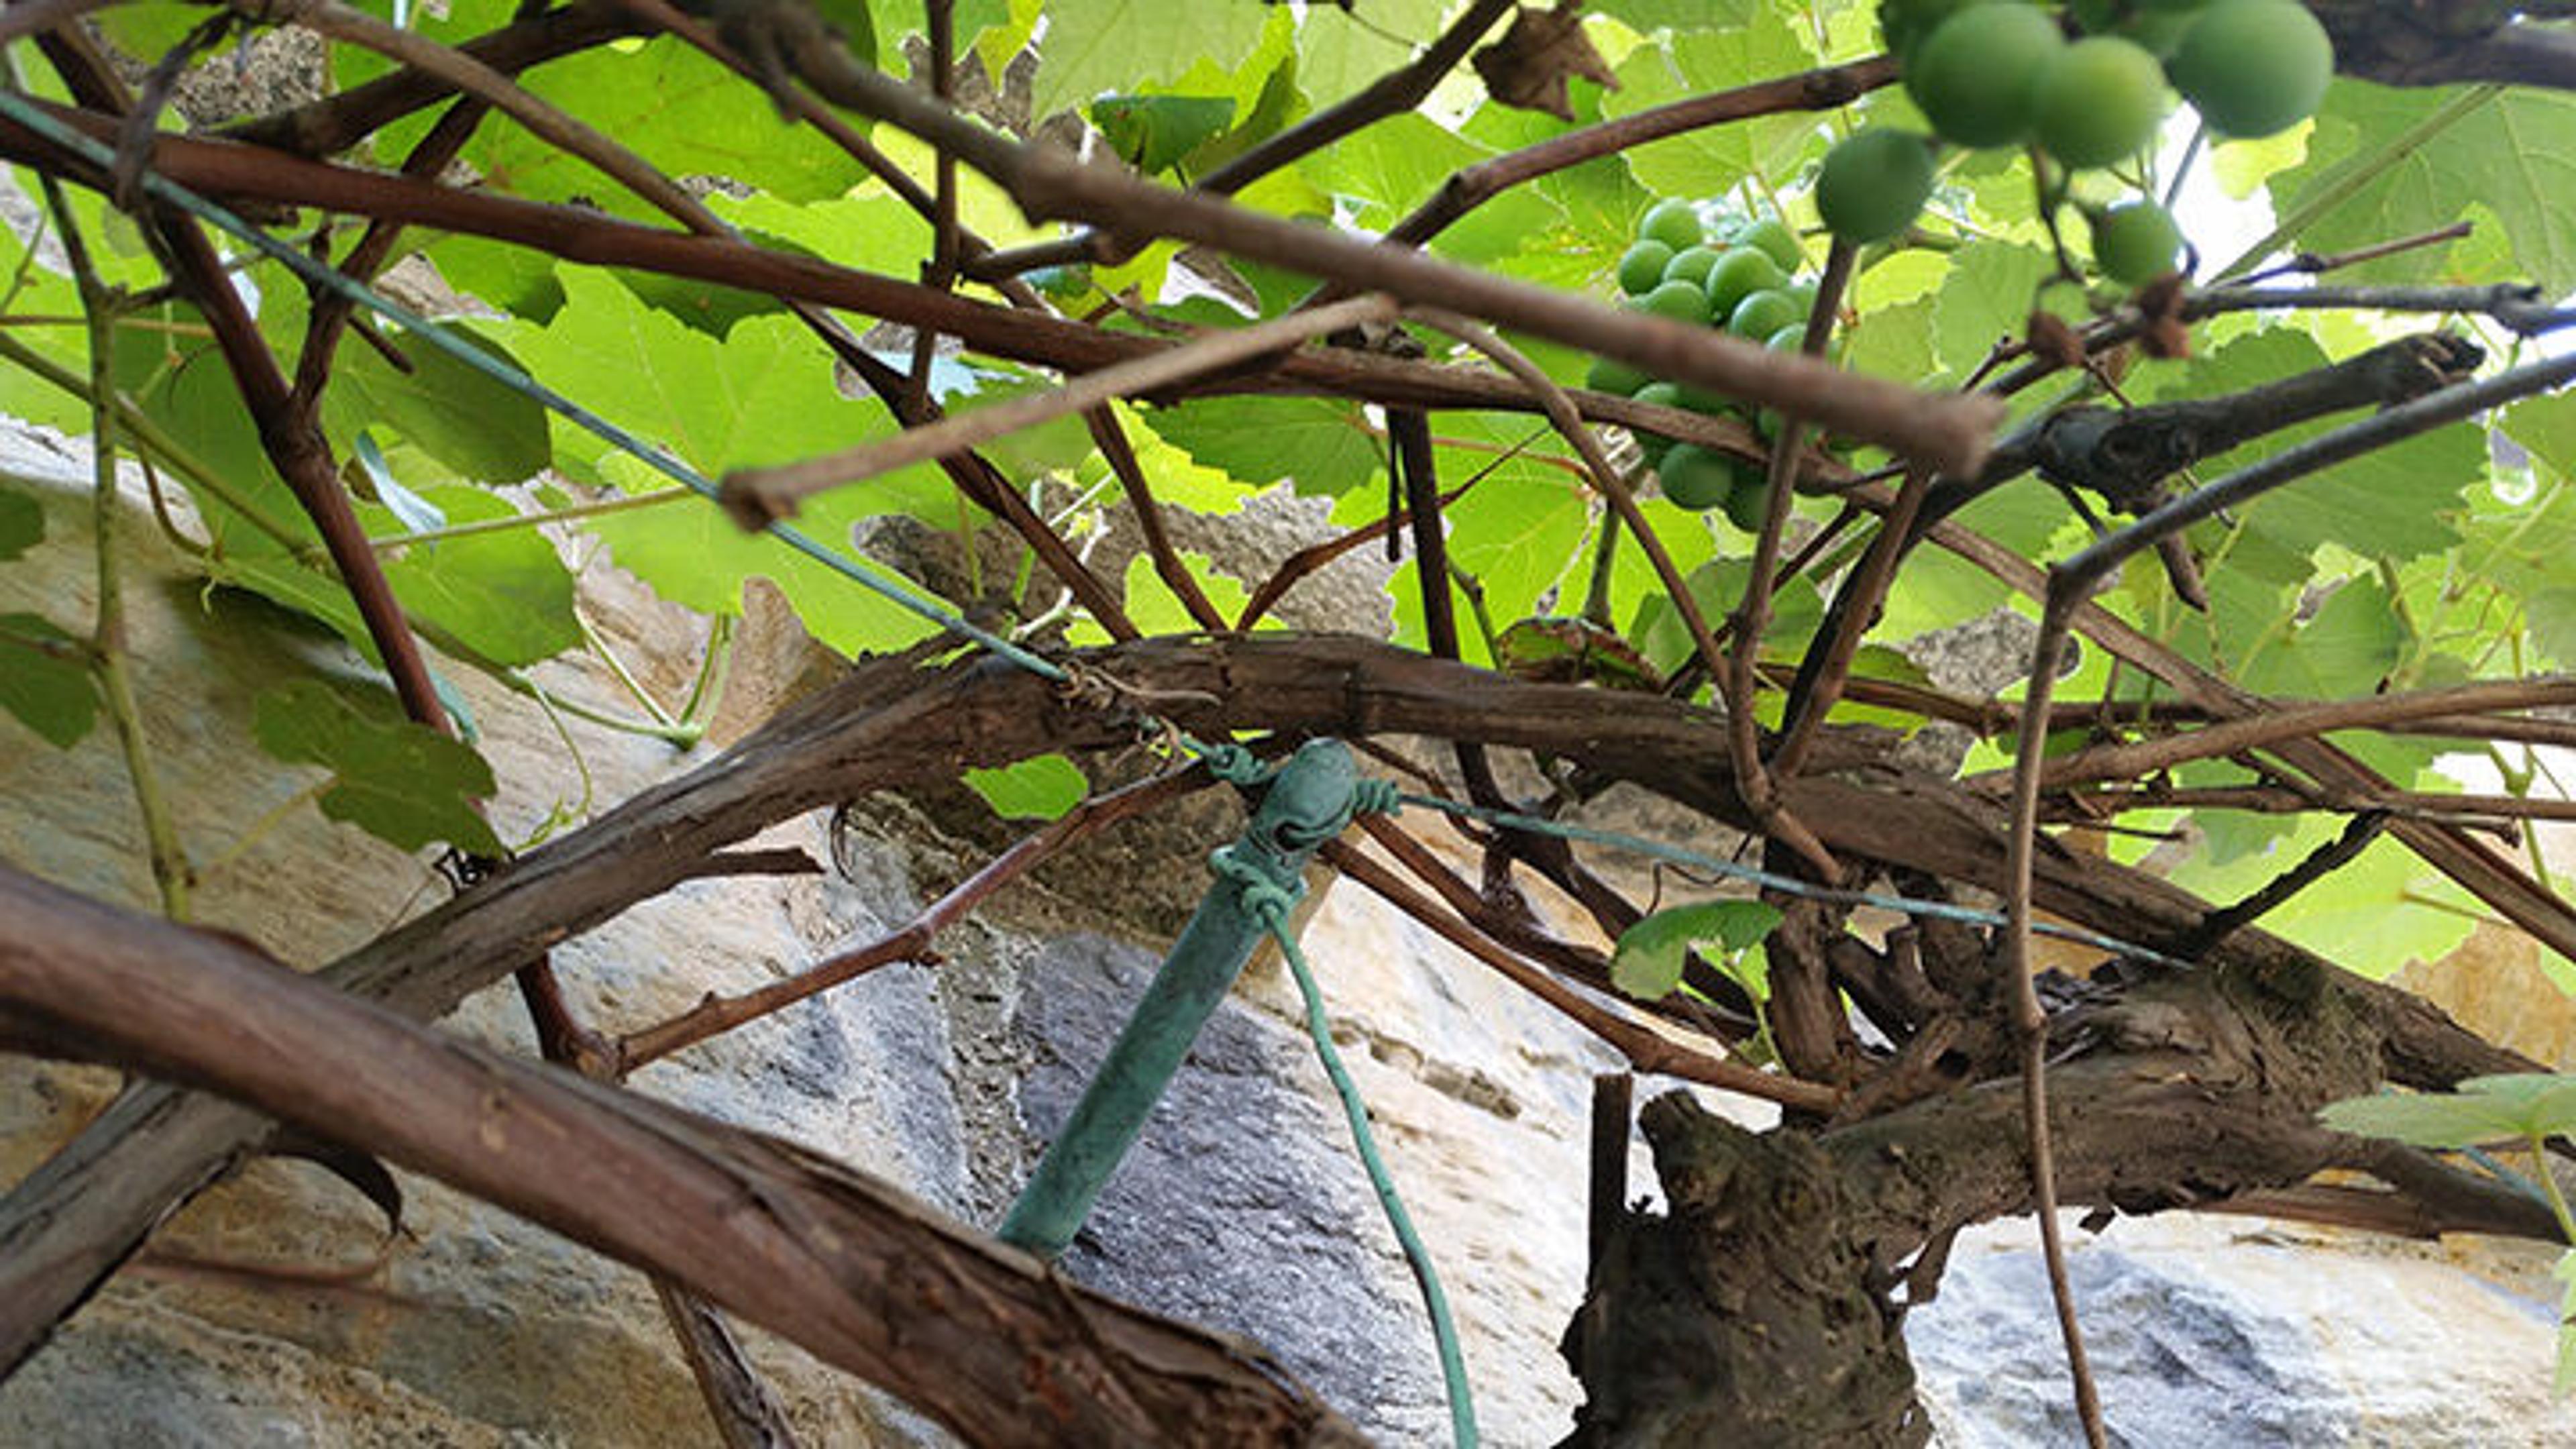 A detail shot of the grapevines at The Met Cloisters